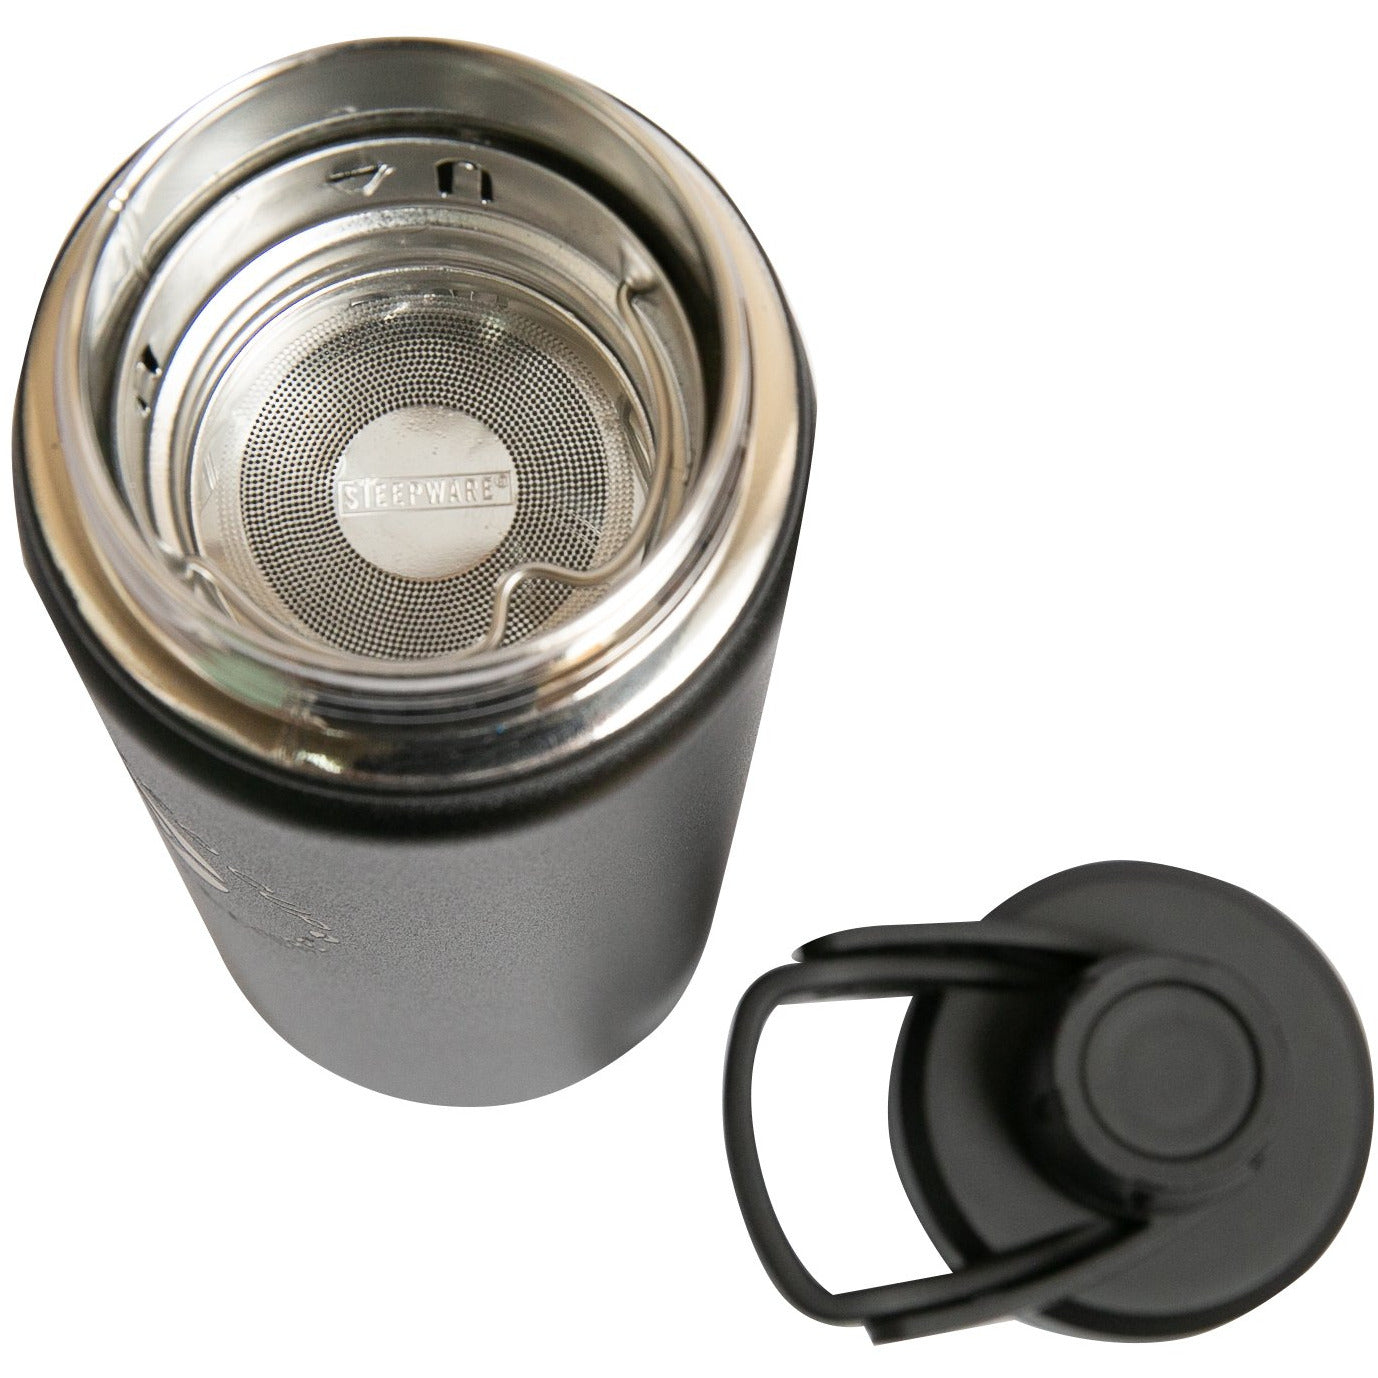 Tea Thermos, The Cultured Cup